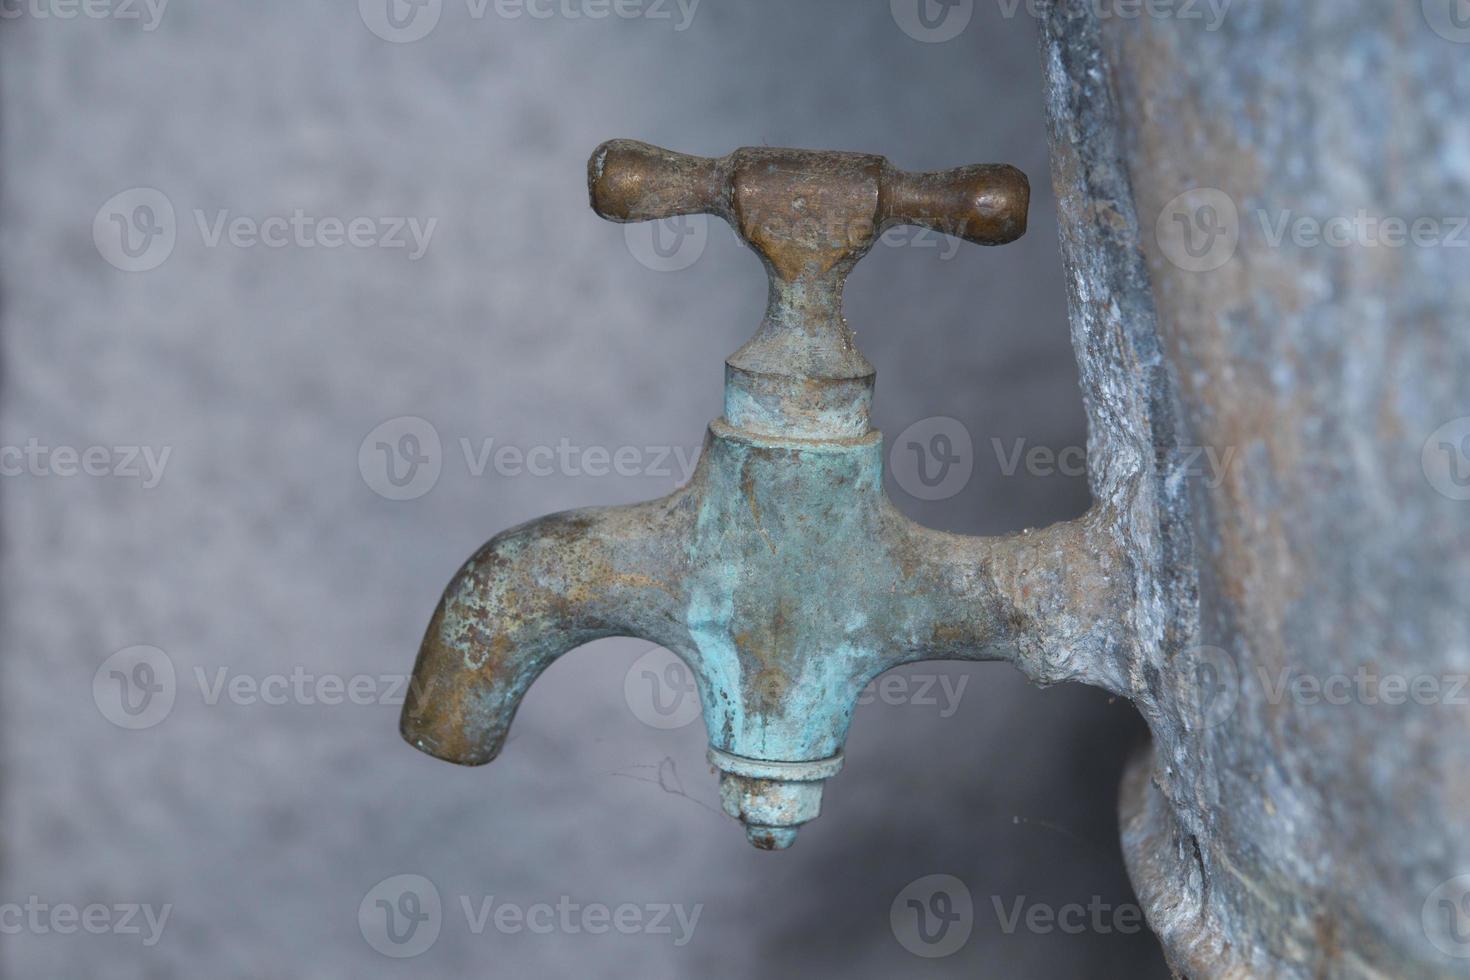 Vintage zinc tap faucet used for grape harvest and wine photo